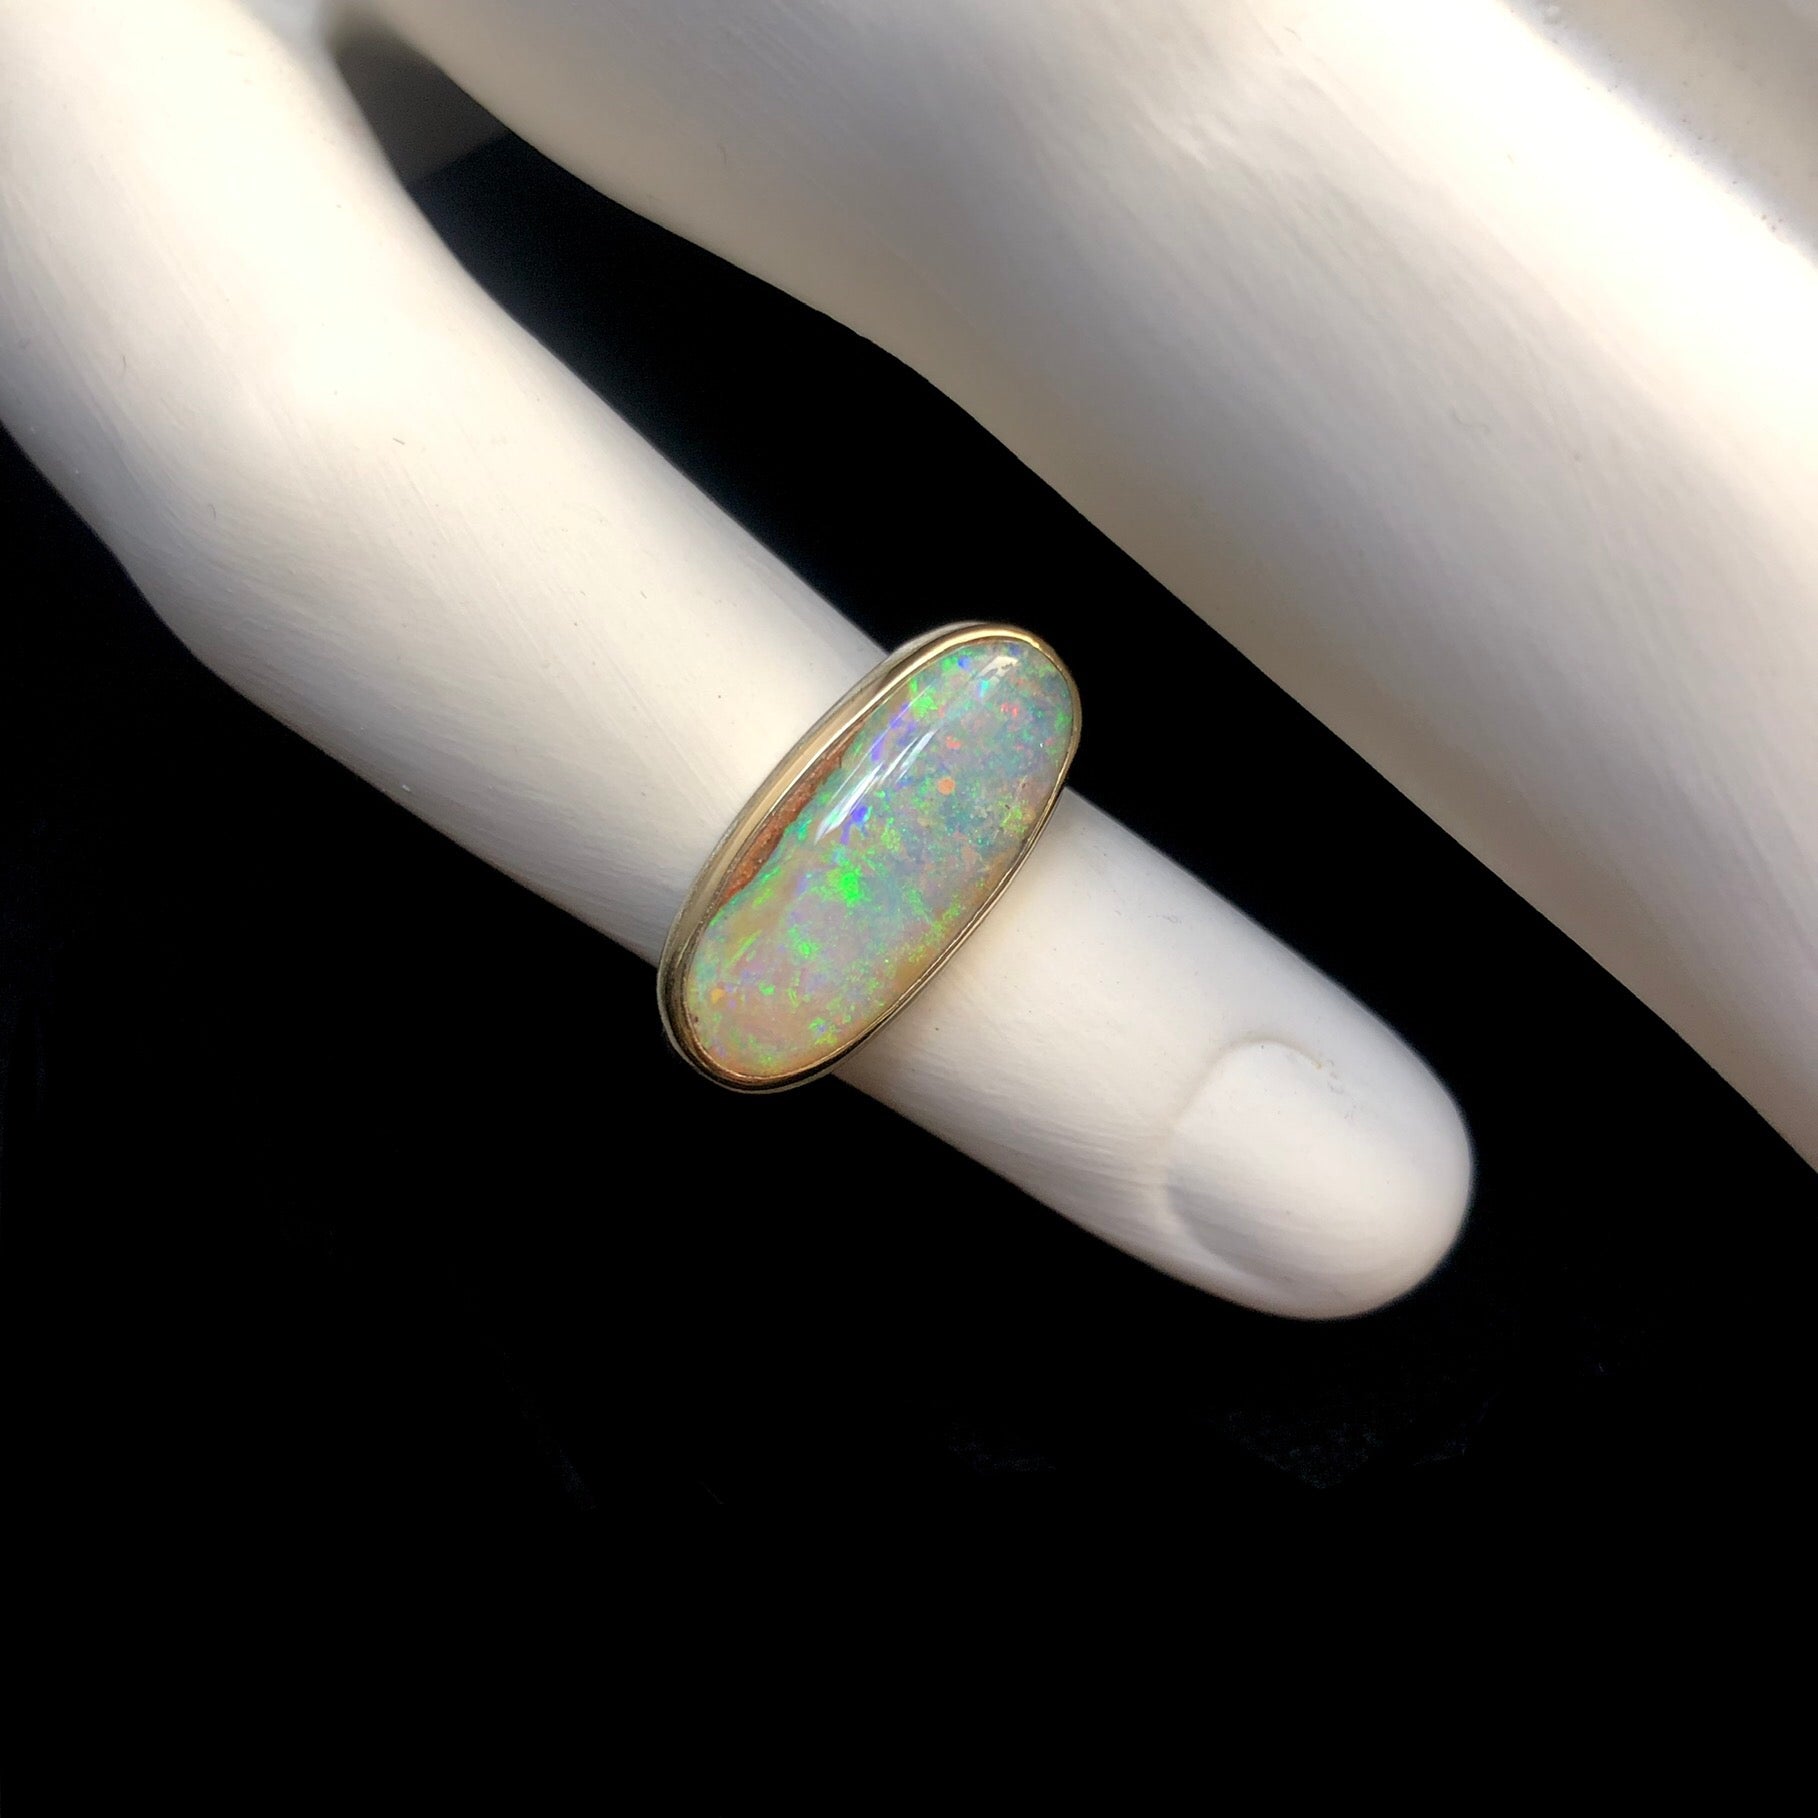 Iridescent green, violet purple and pink confetti of color in opal stone ring shown on white ceramic finger